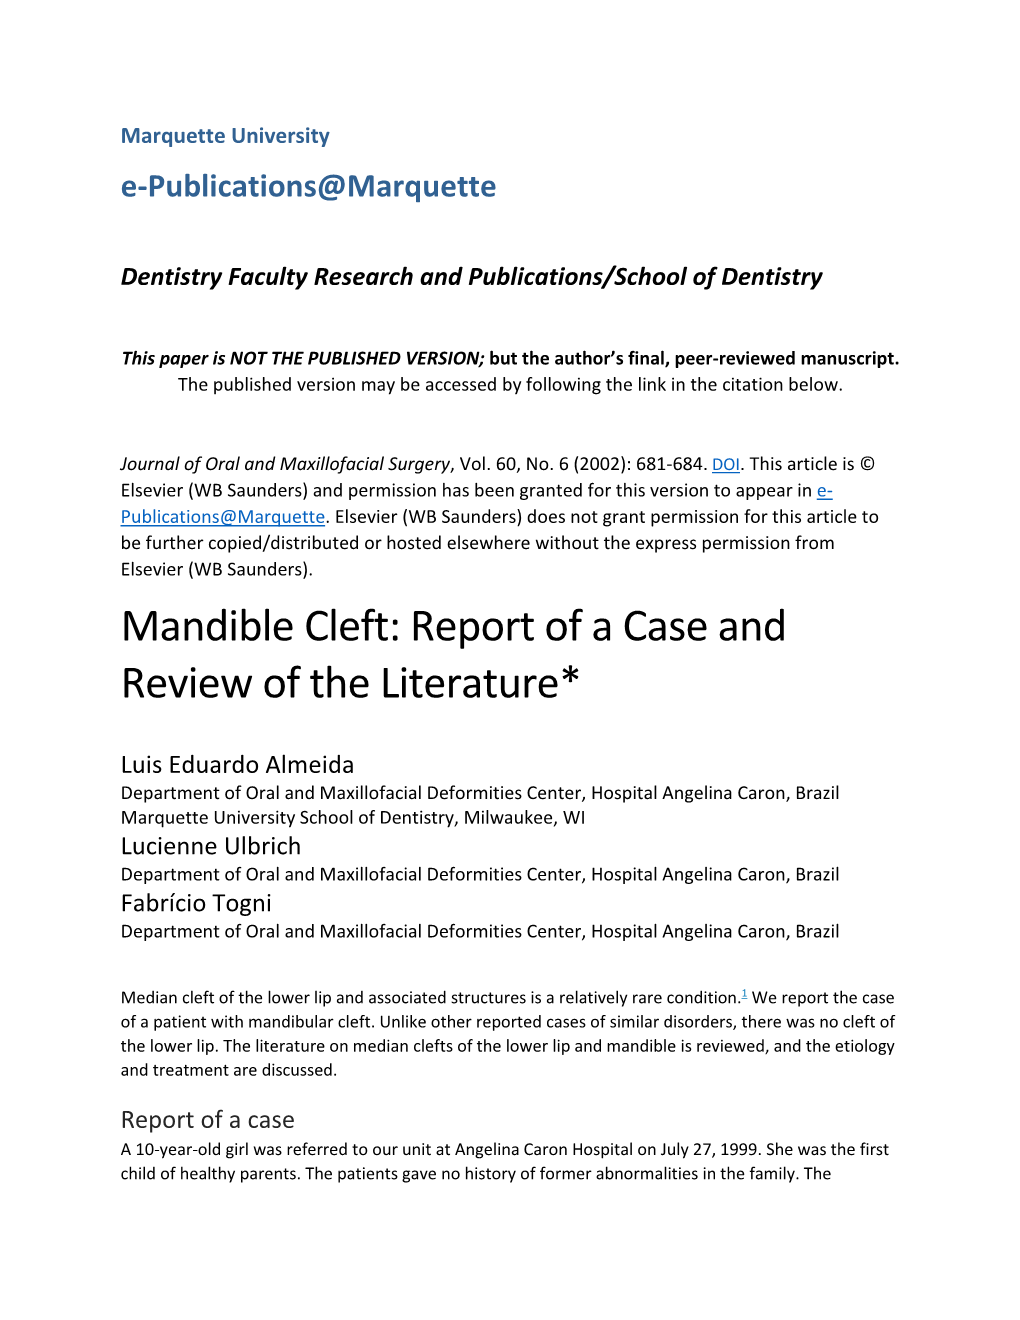 Mandible Cleft: Report of a Case and Review of the Literature*